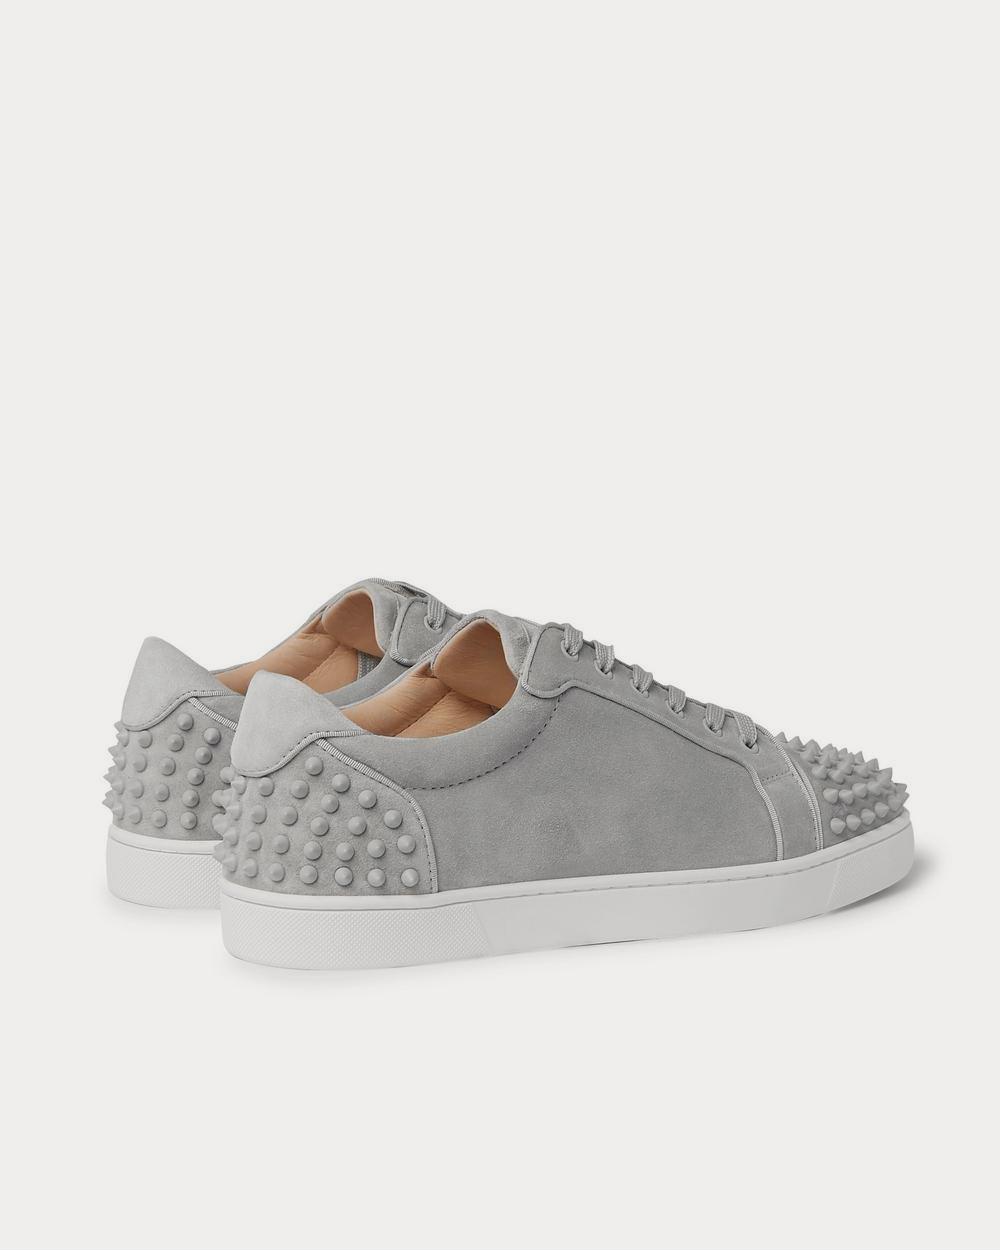 Christian Louboutin - Seavaste 2 Orlato Studded Suede  Gray low top sneakers